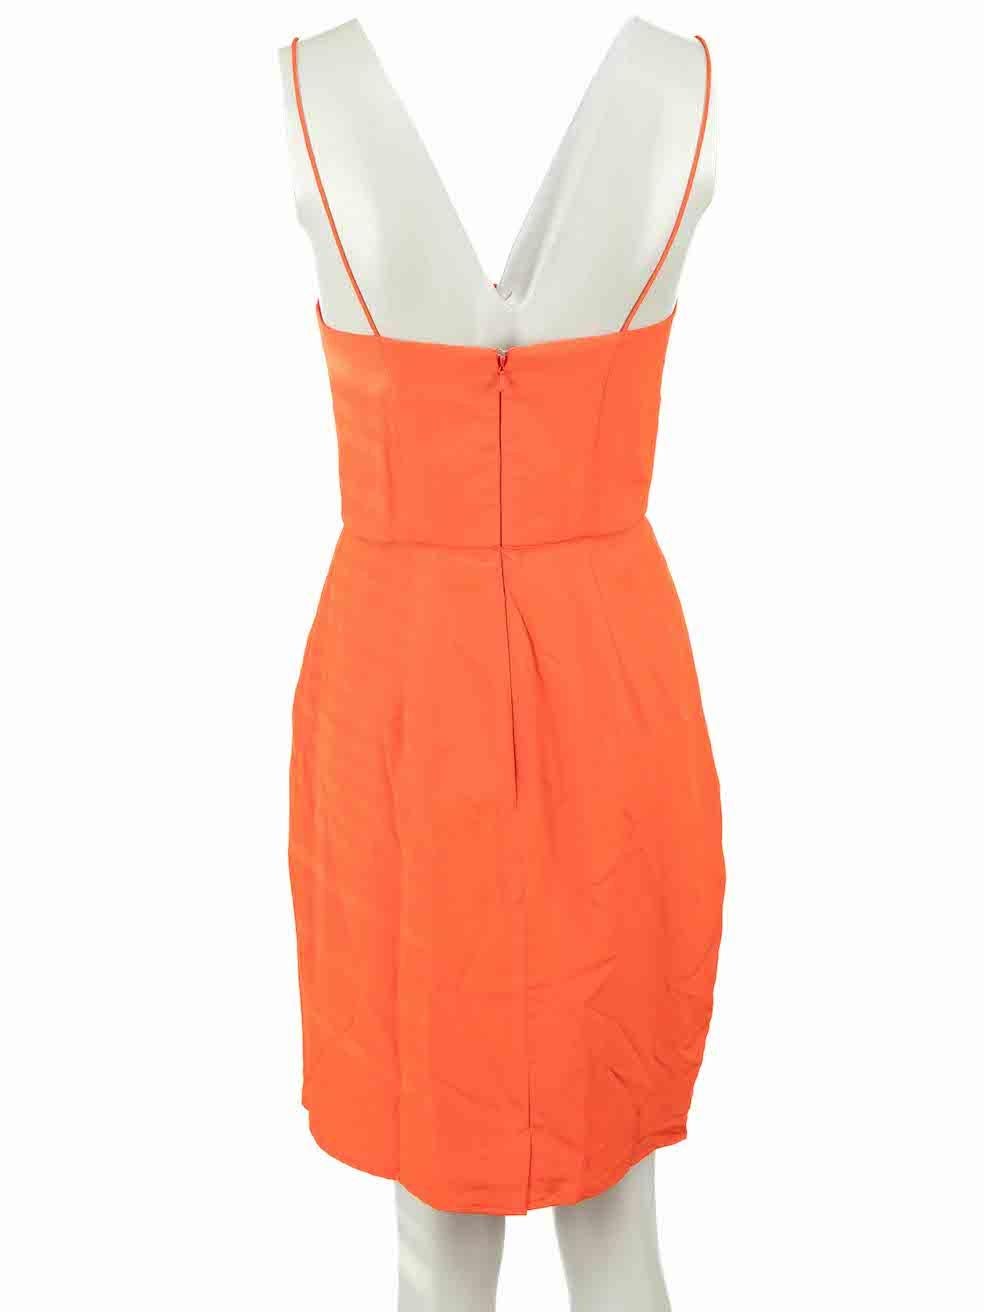 Zimmermann Orange Silk Cutout Mini Dress Size M In Excellent Condition For Sale In London, GB